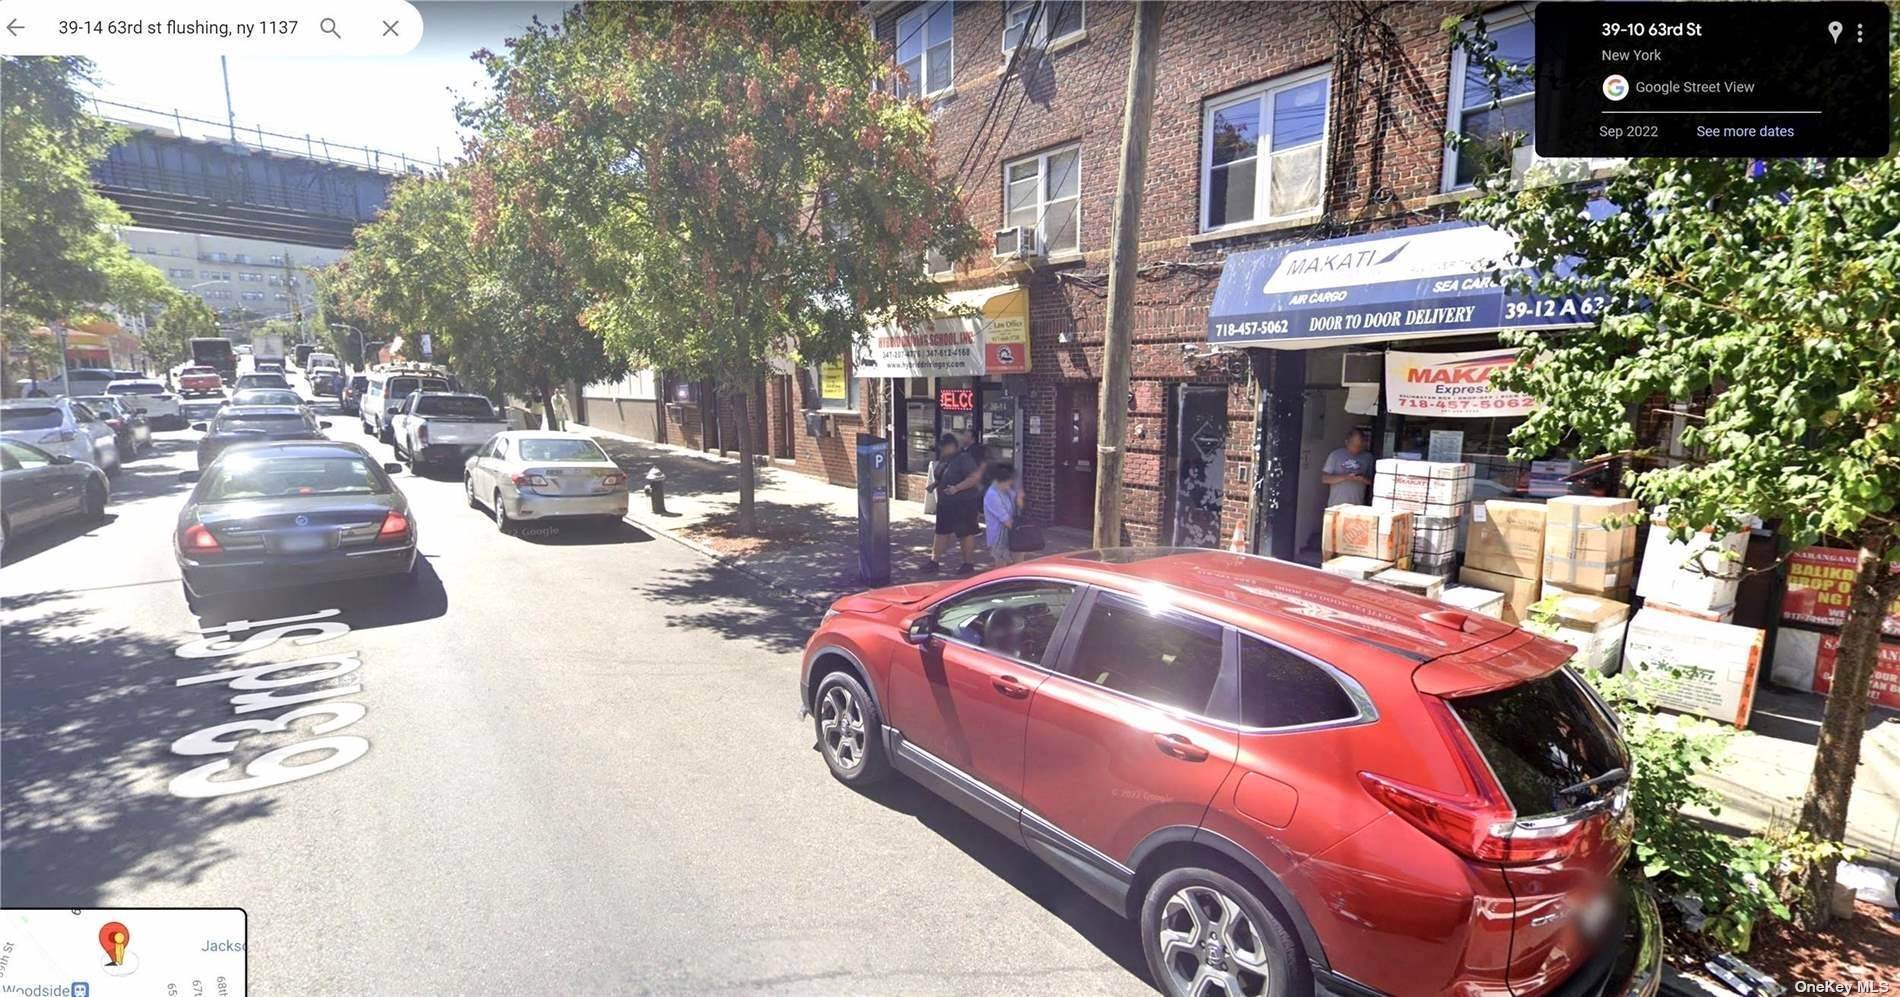 Commercial الساعة 39-14 63rd Street # Store Woodside, New York 11377 United States